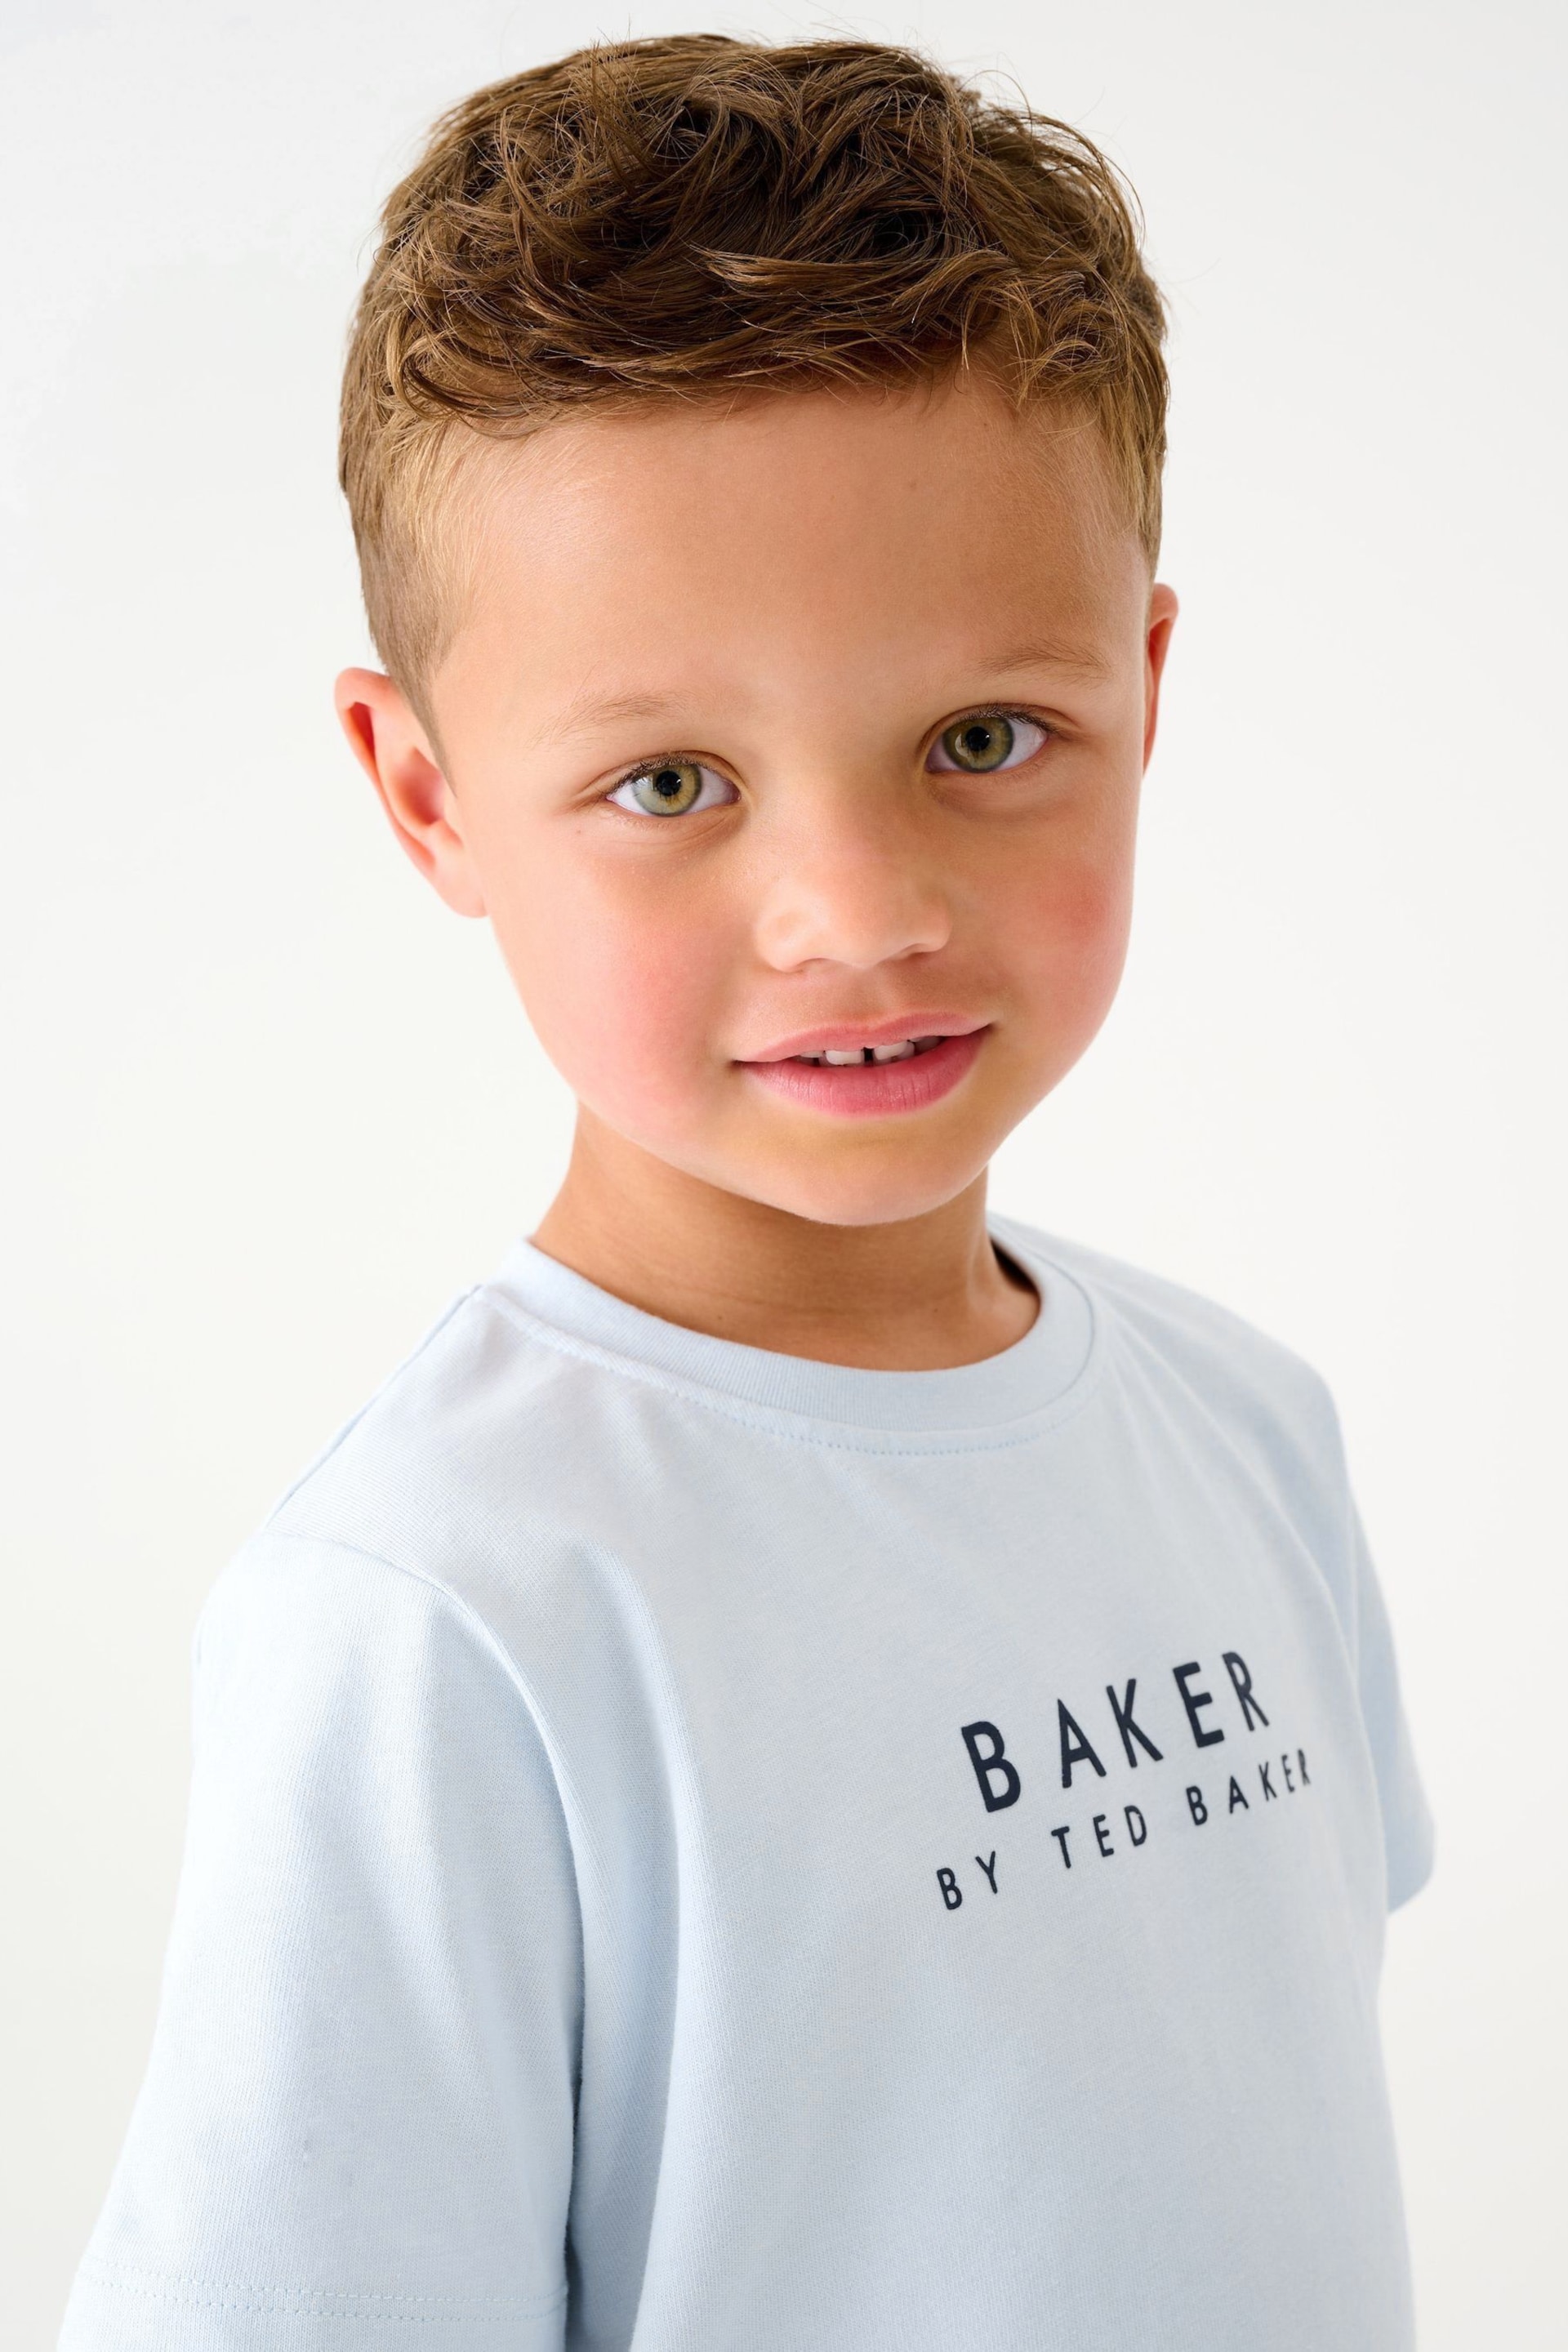 Baker by Ted Baker T-Shirt and Shorts Set - Image 3 of 7